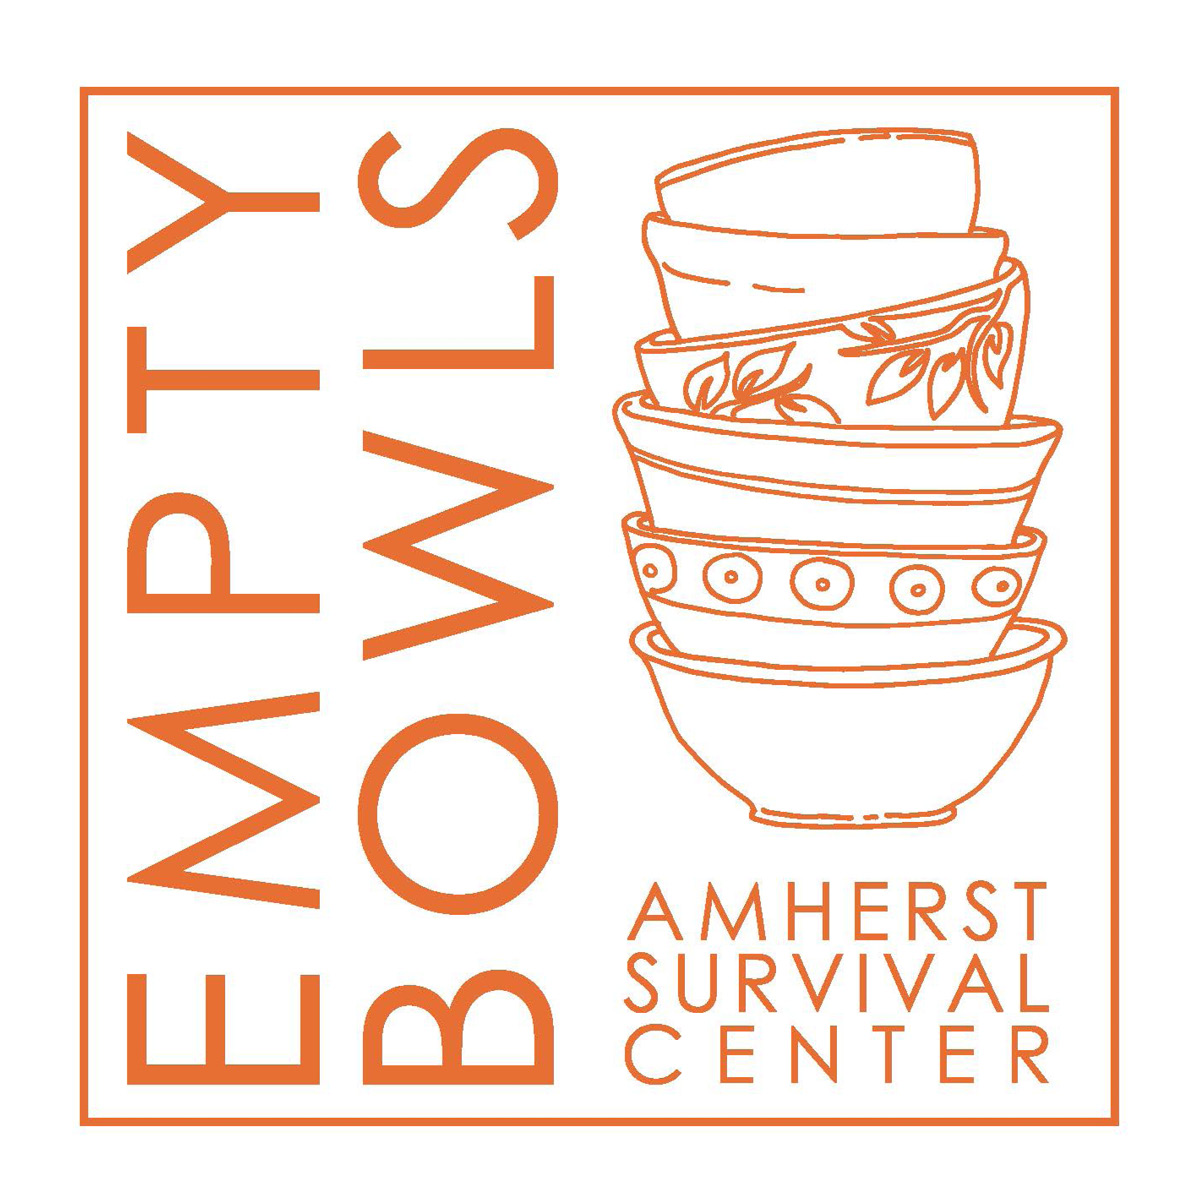 Empty Bowls Amherst Survival Center logo with illustration of a stack of bowls